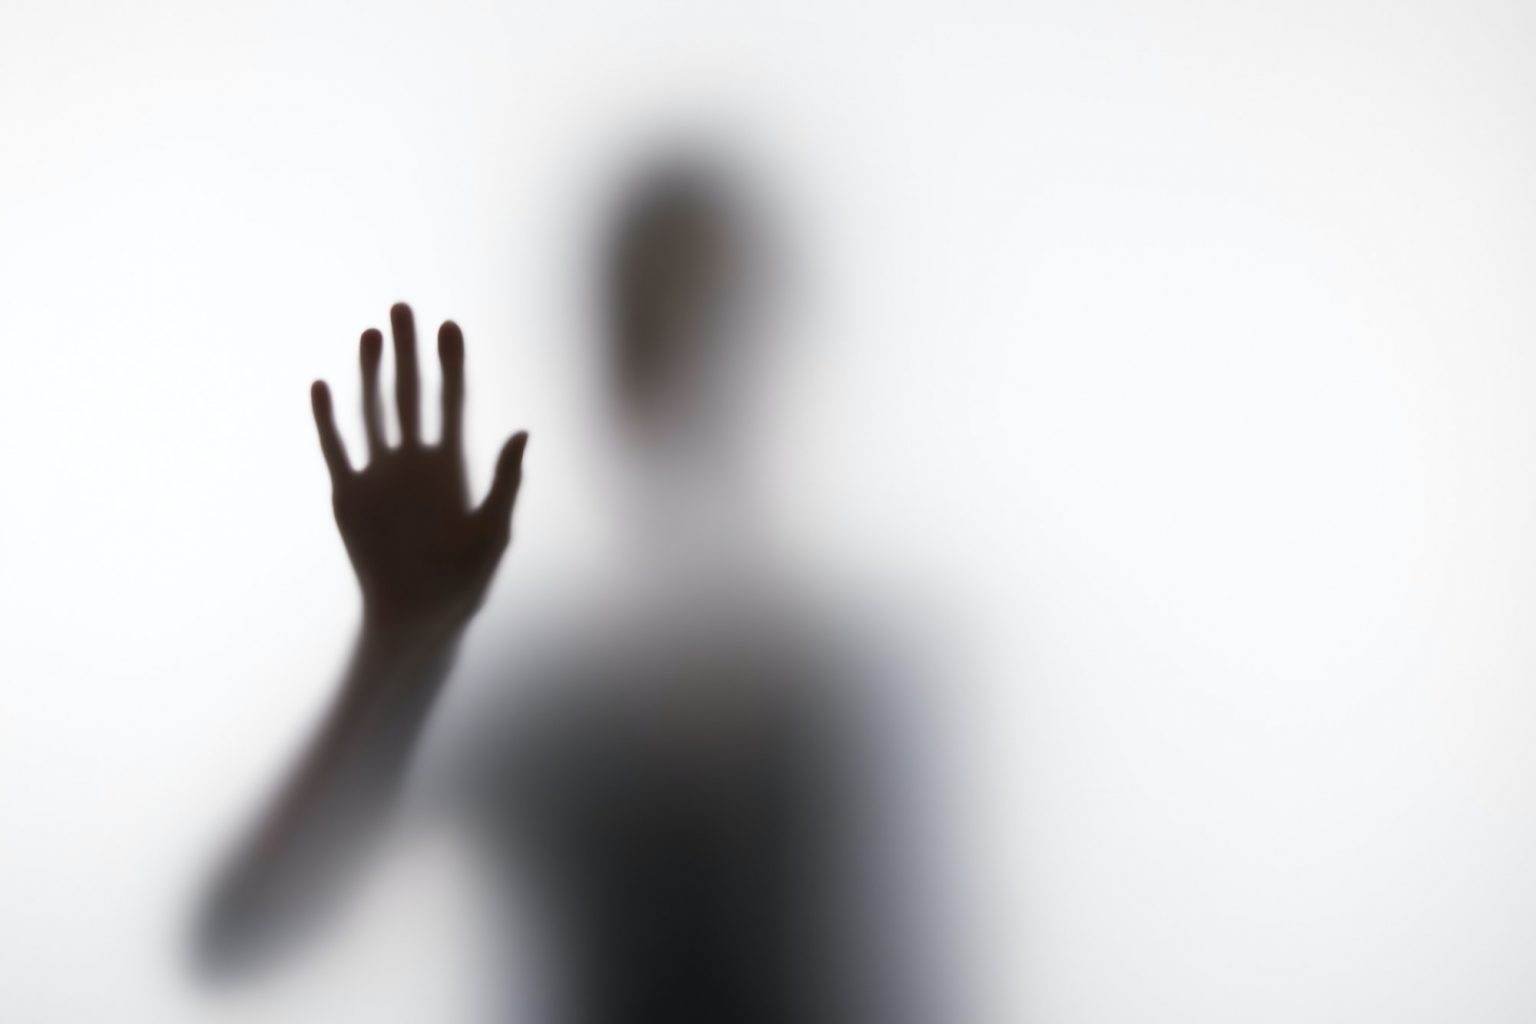 Blurry silhouette of person touching glass with hand